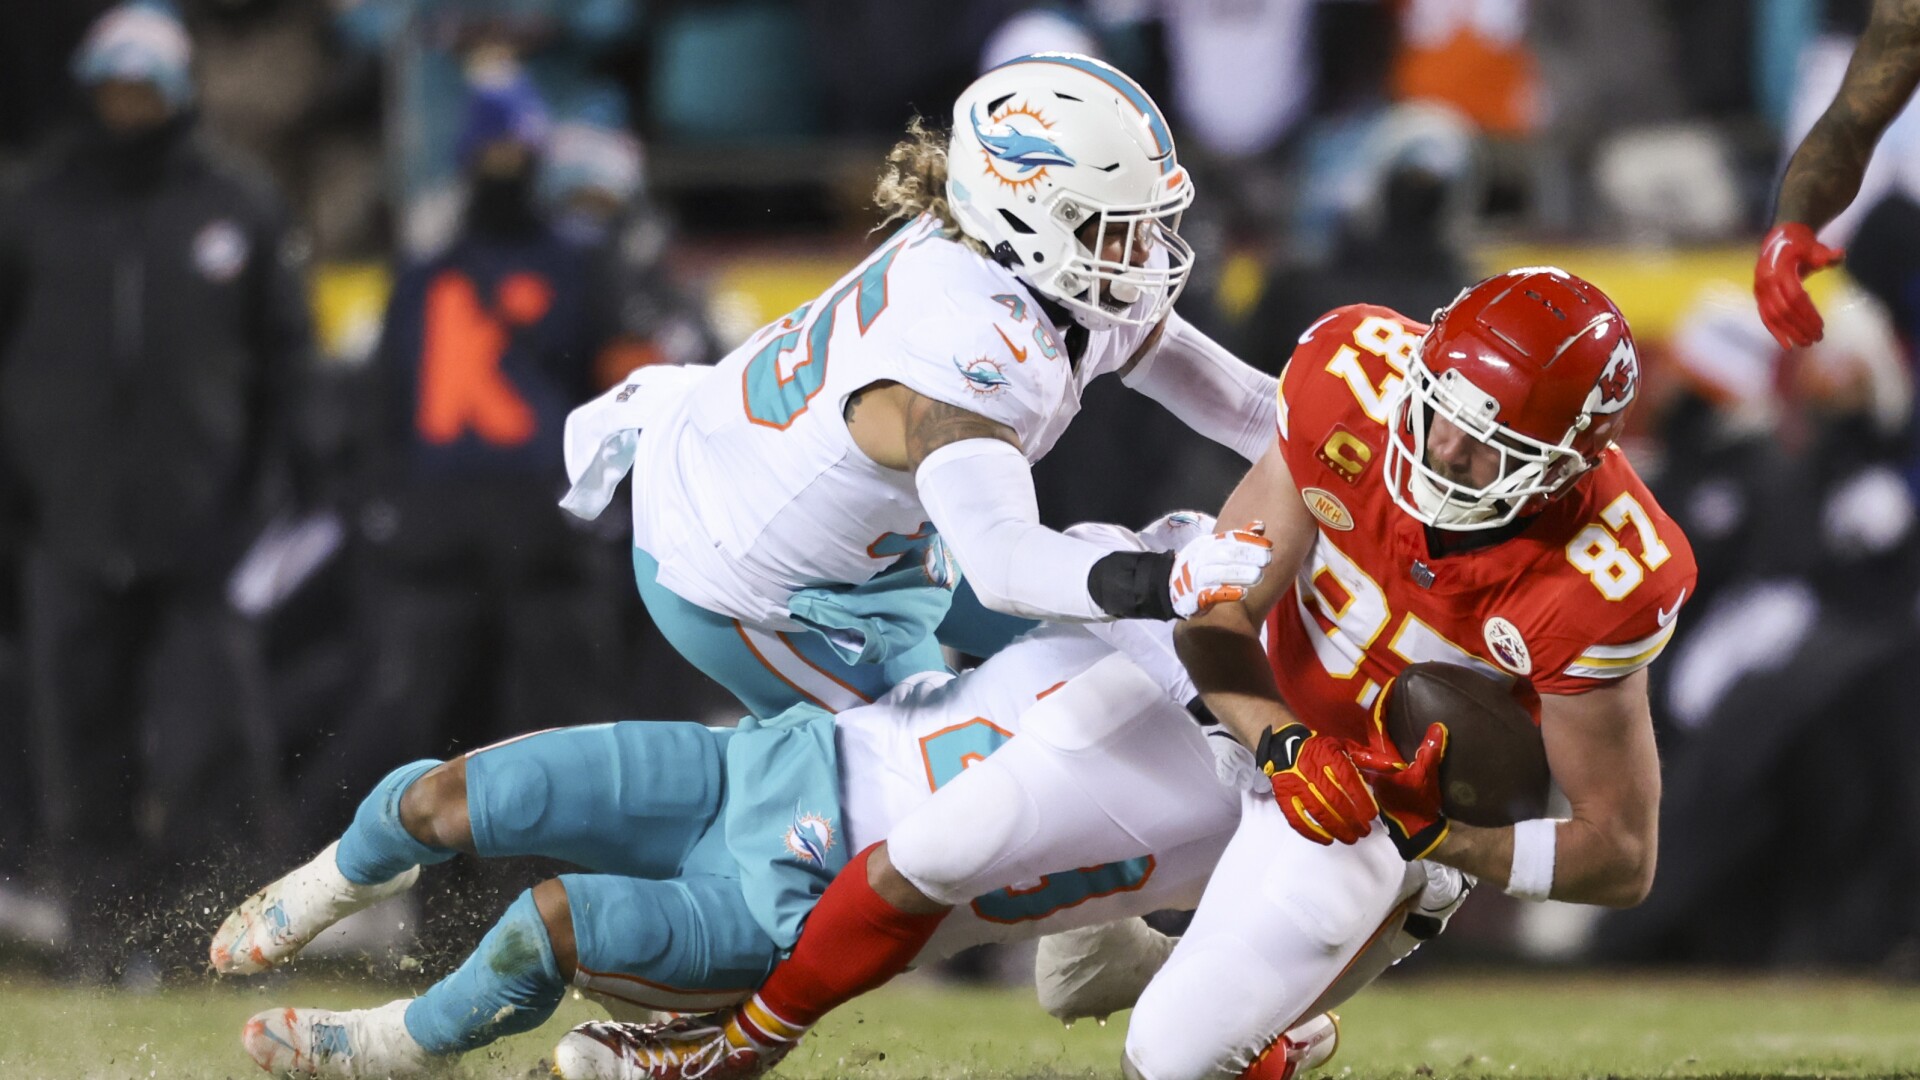 travis kelce closing in on jerry rice's postseason receiving records